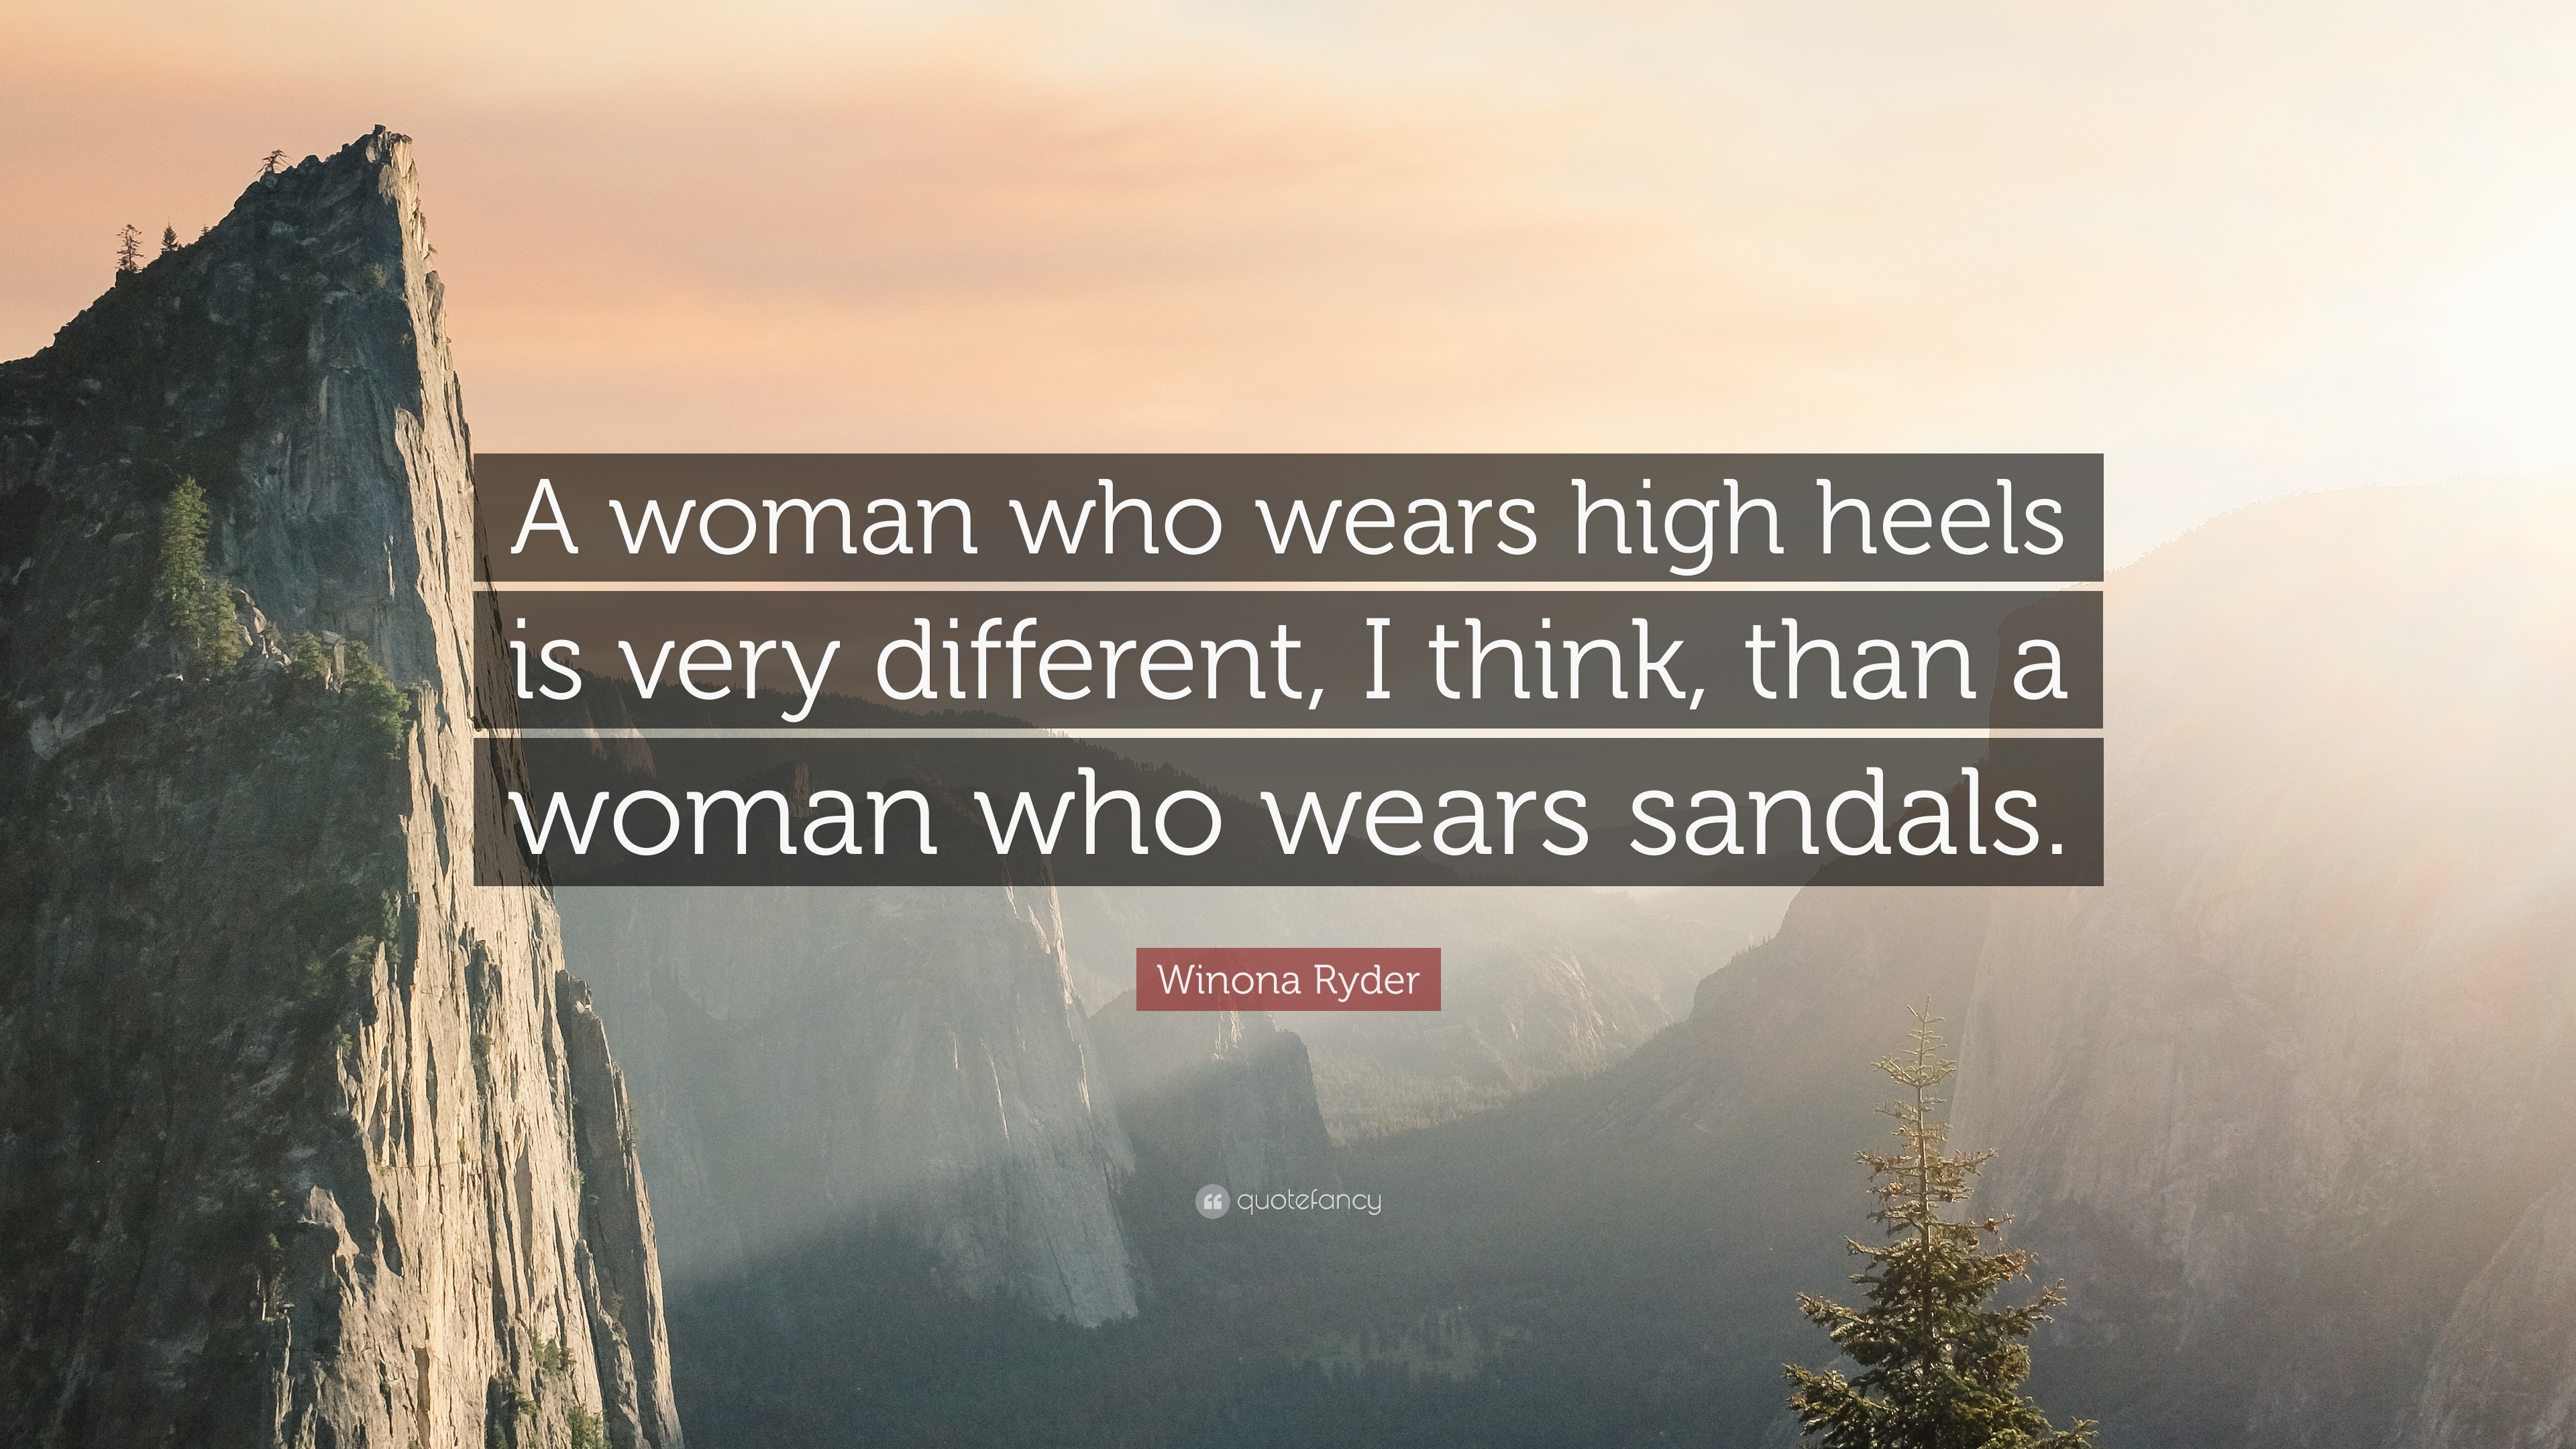 Winona Ryder Quote: “A woman who wears high heels is very different, I ...